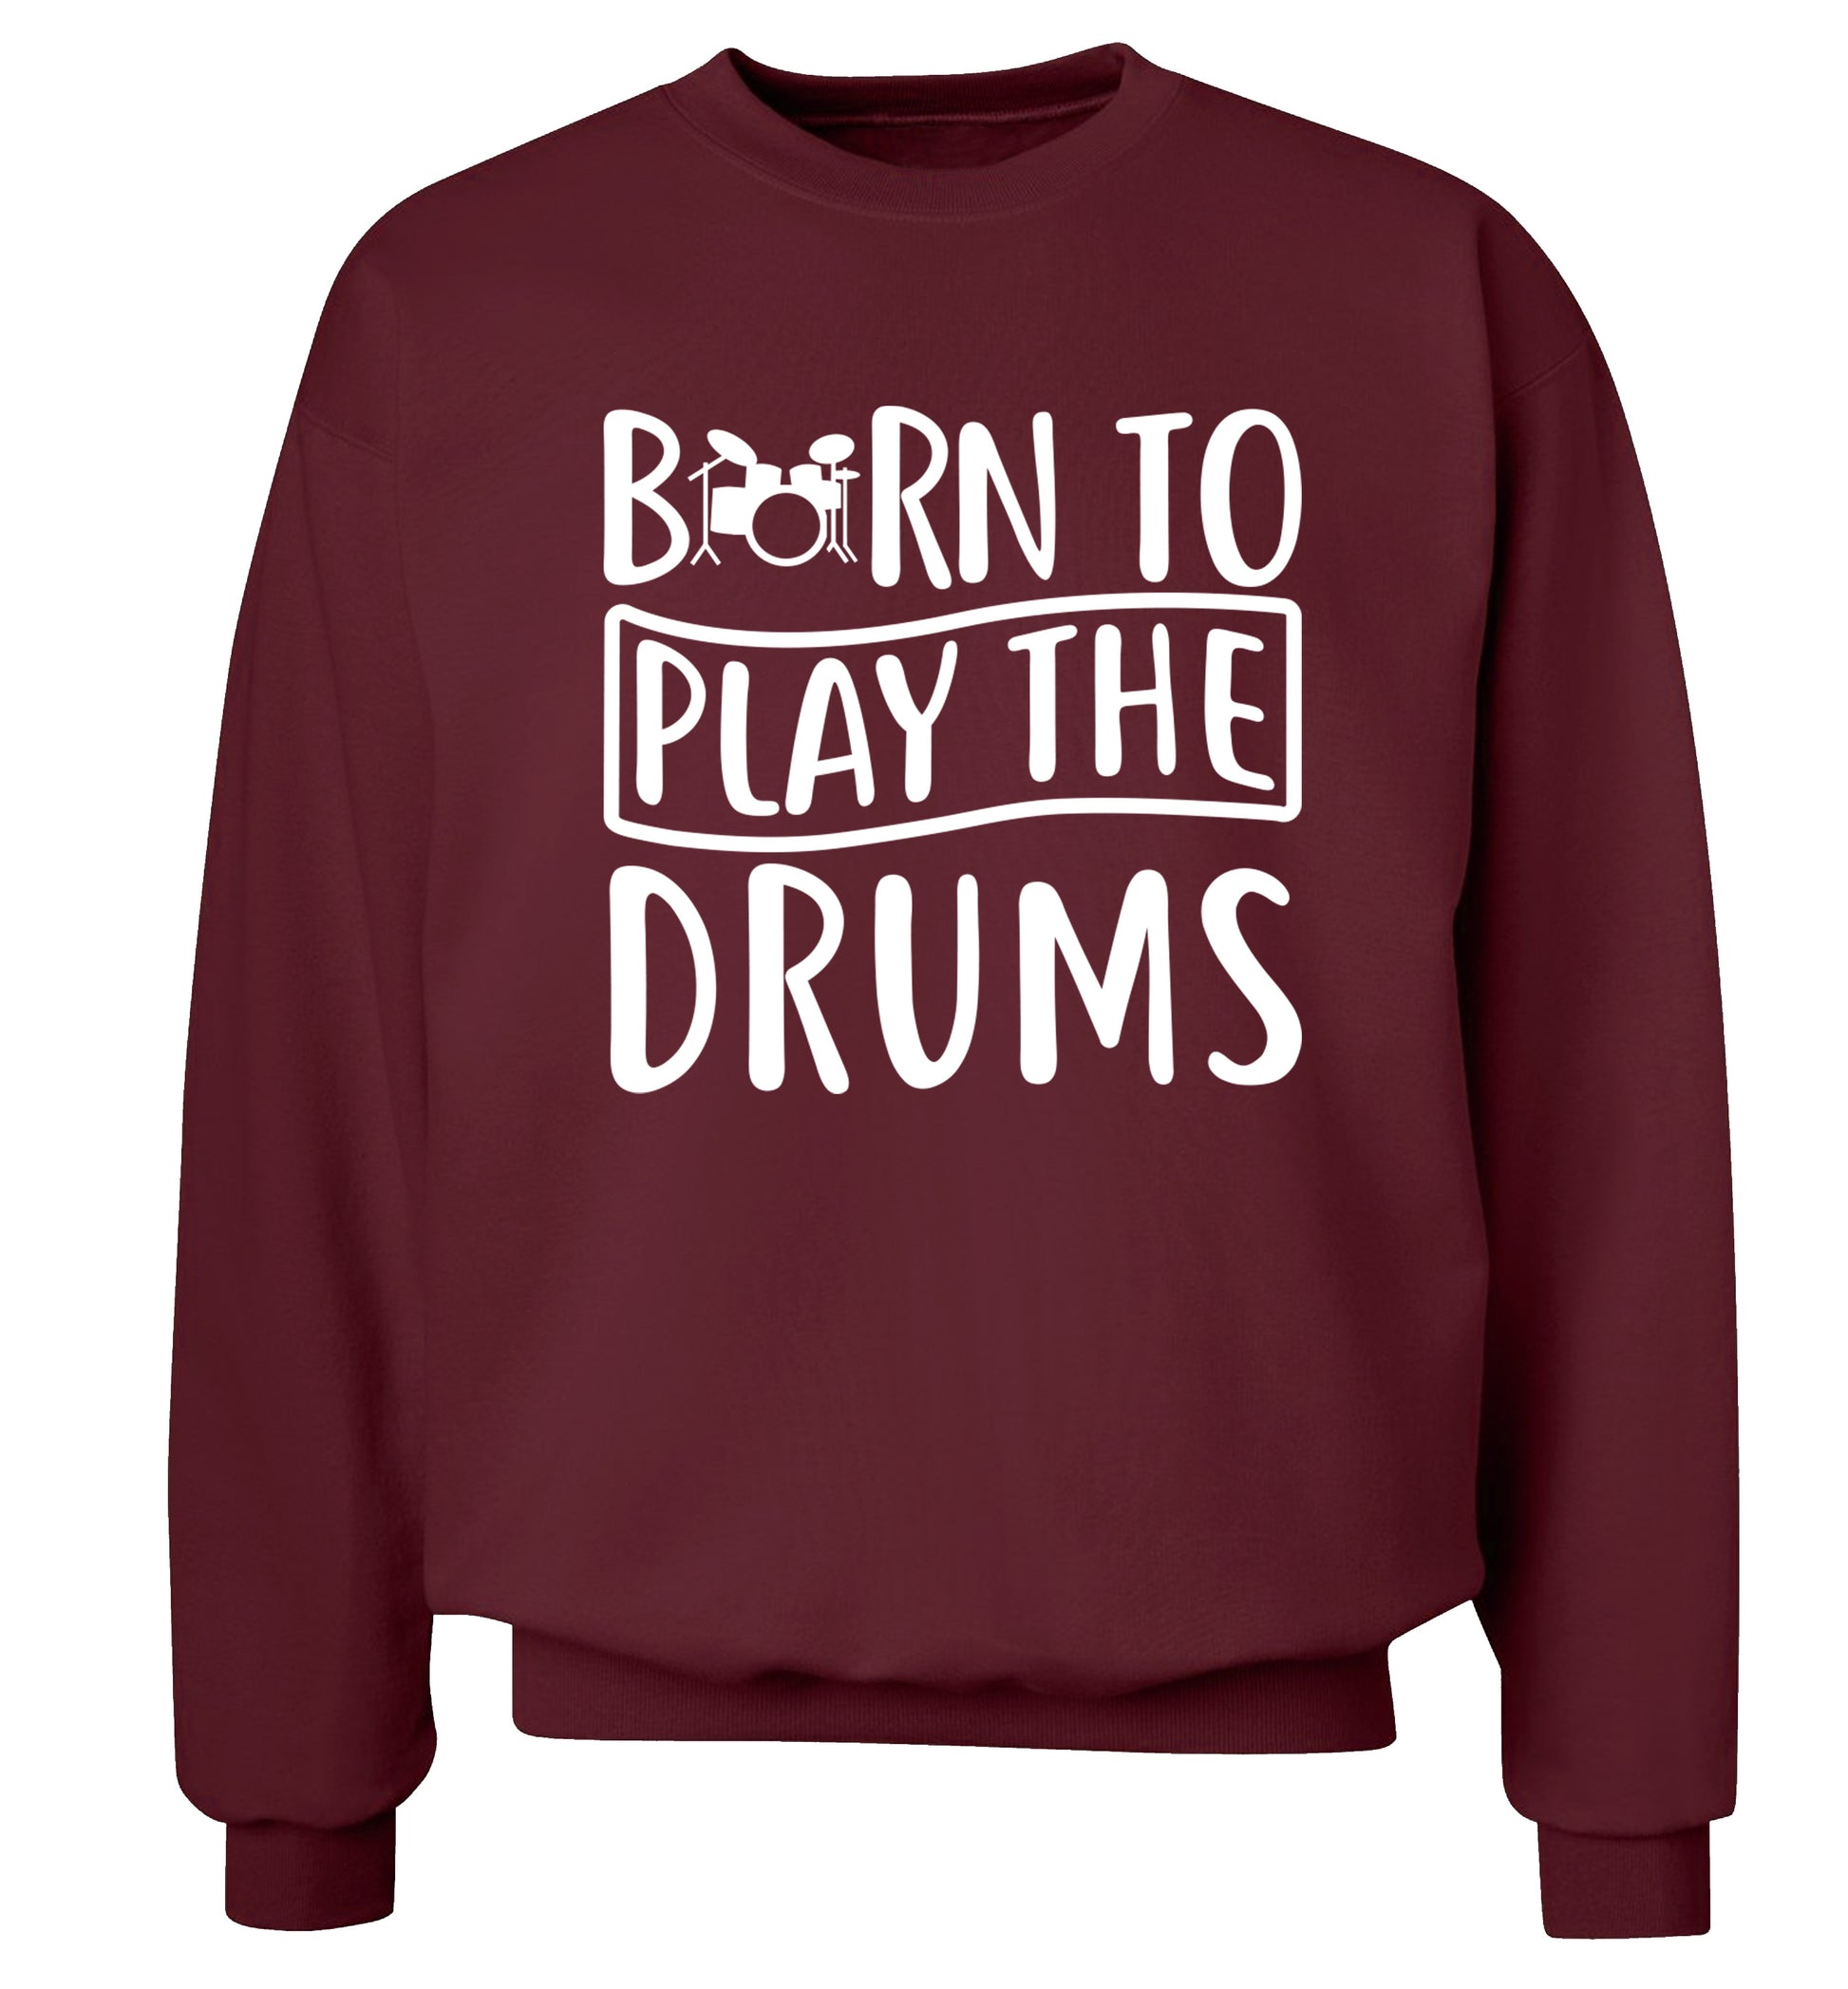 Born to play the drums Adult's unisex maroon Sweater 2XL